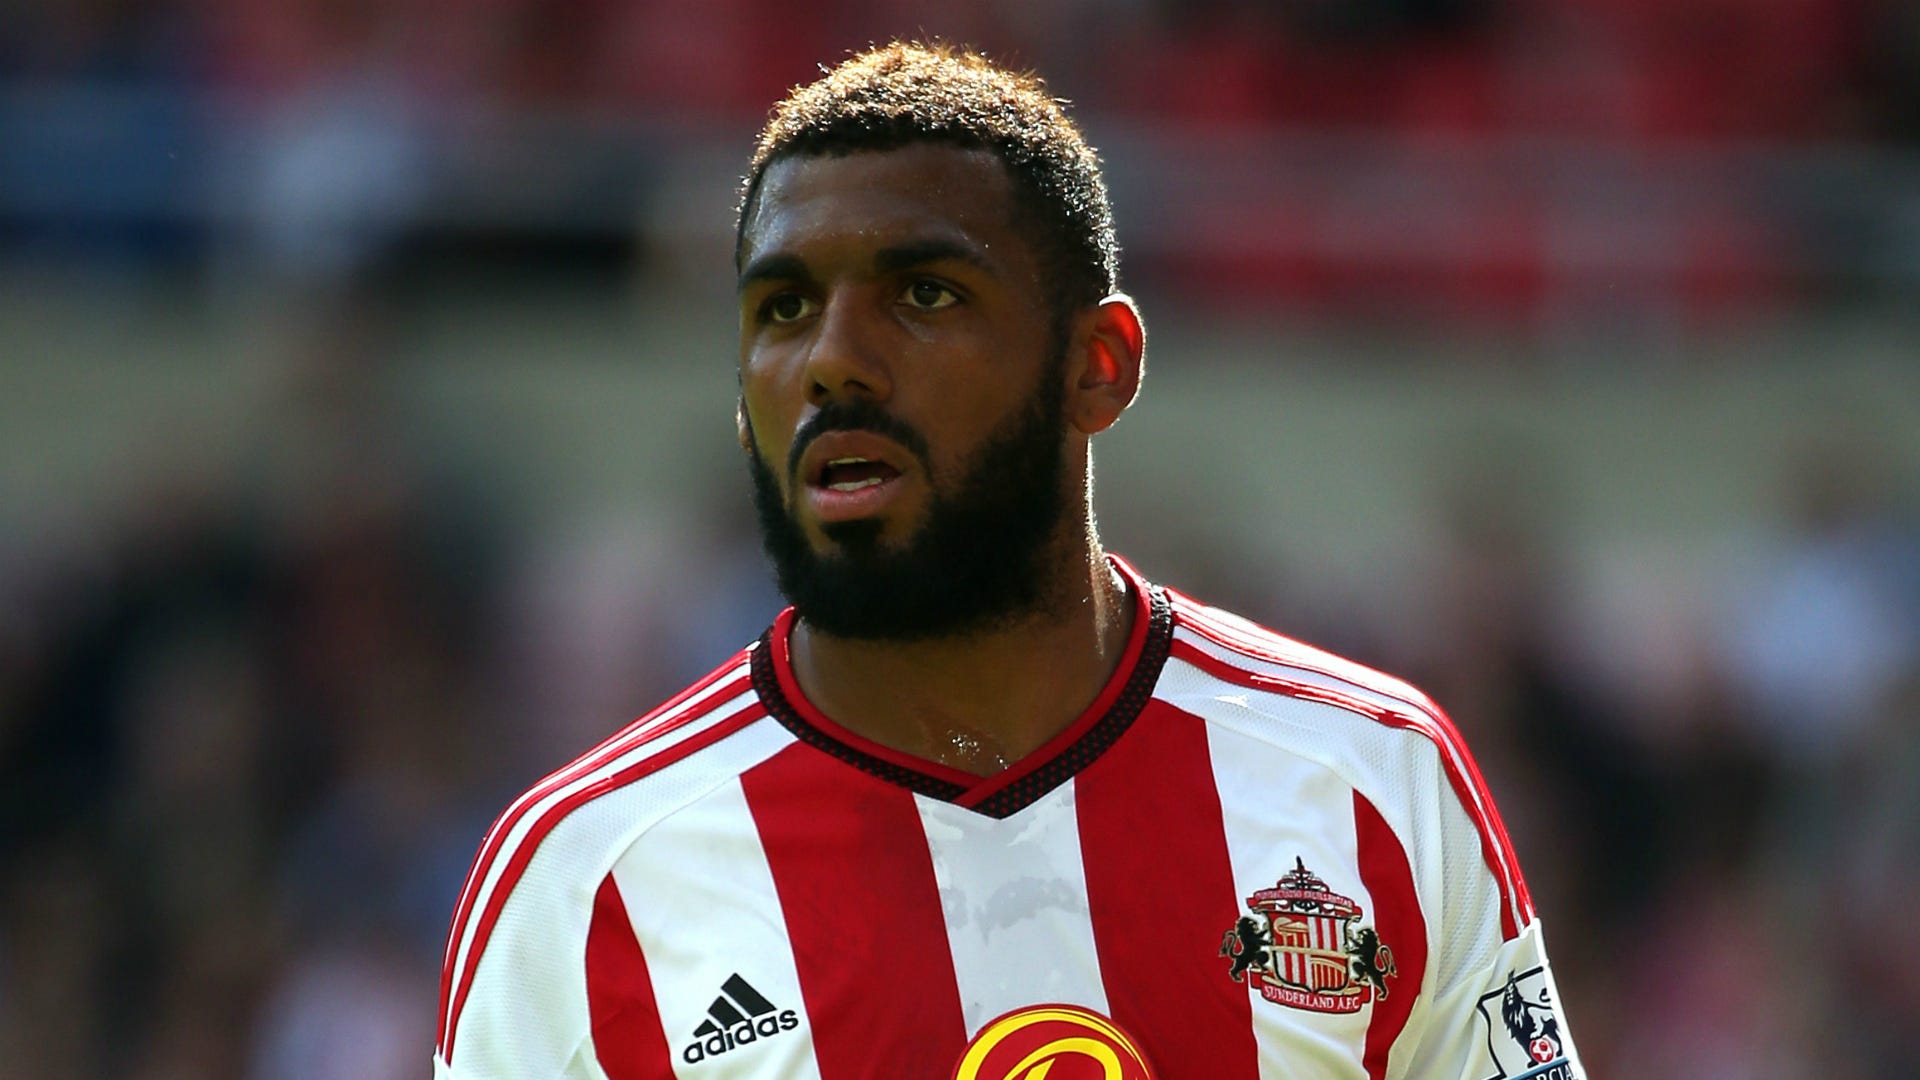 Exclusive: Yann M’Vila on advising Arsenal’s William Saliba, joining Cristiano Ronaldo in Saudi Arabia and why Sunderland’s relegation was no coincidence after he left